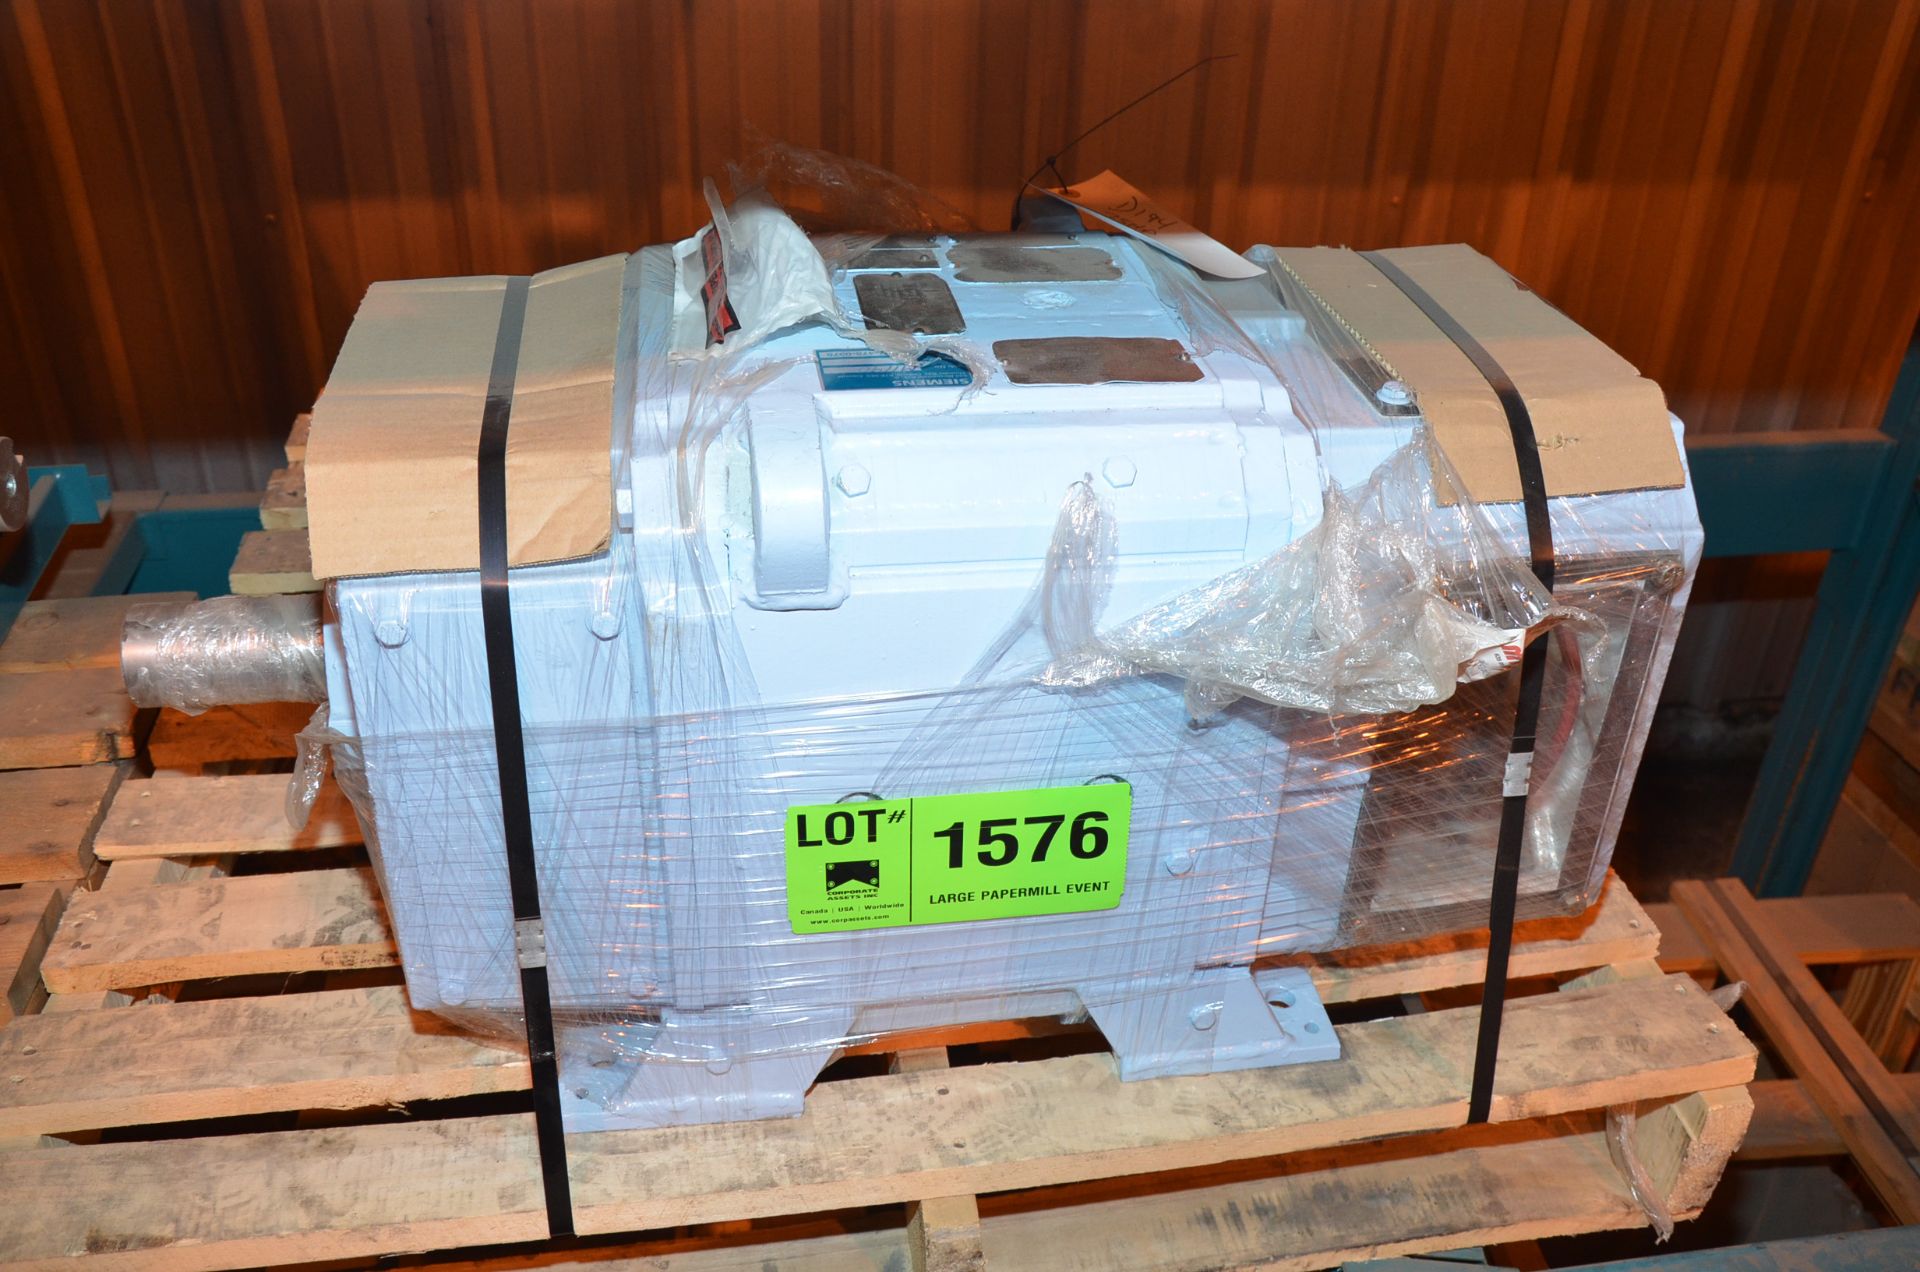 SIEMENS 75HP/1750RPM/500V ELECTRIC MOTOR, S/N N/A [RIGGING FEES FOR LOT #1576 - $60 USD PLUS